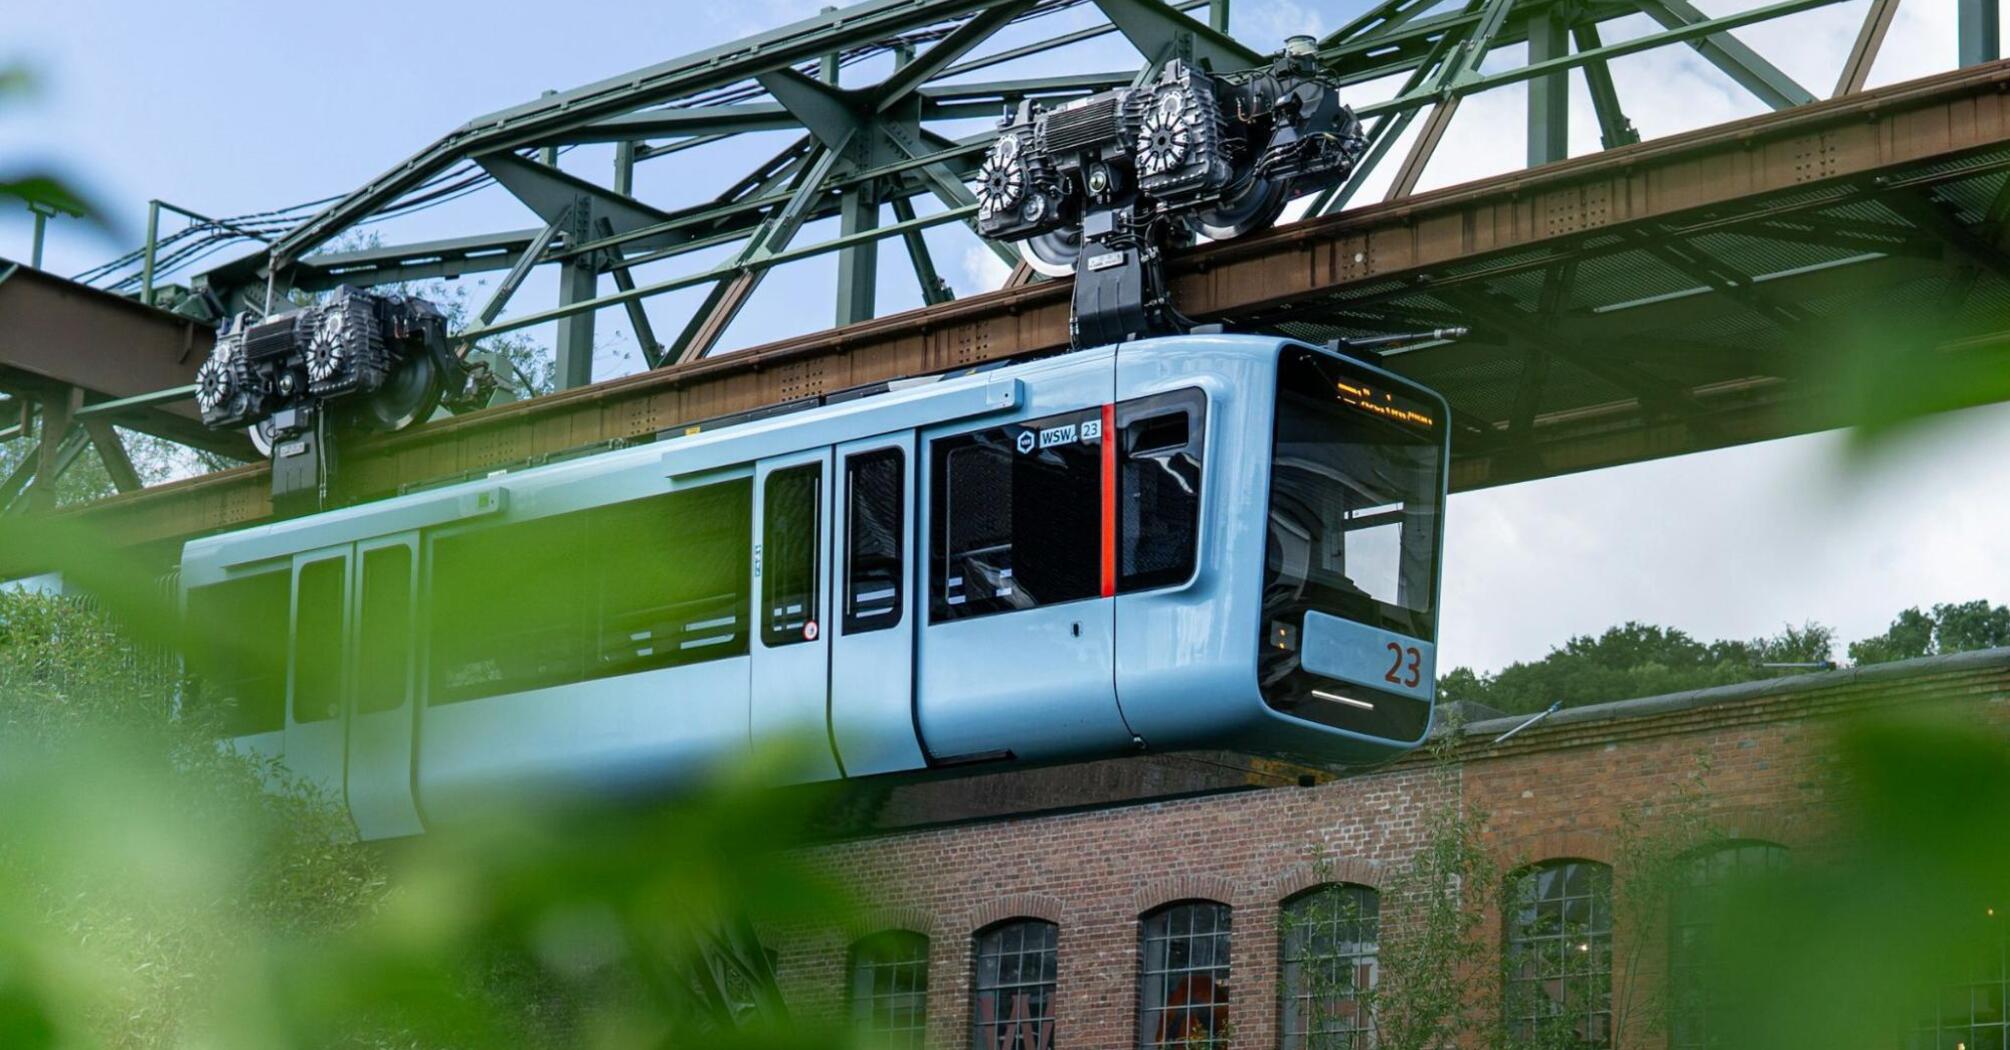 A modern blue carriage of the Schwebebahn suspension railway travels above the streets of Wuppertal, Germany